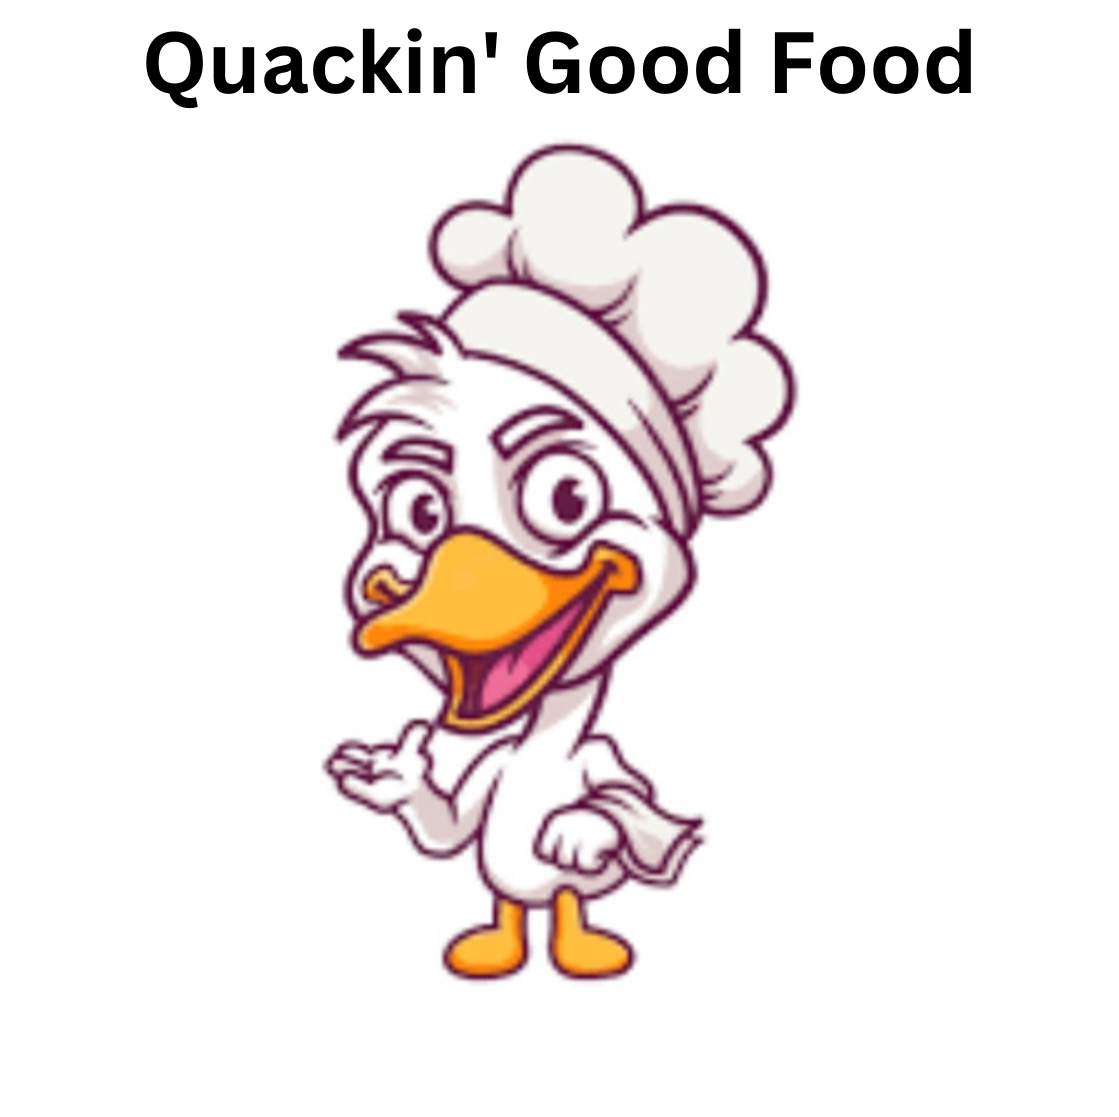 Quackin Good Food: A Culinary Discord Server for All Food Enthusiasts